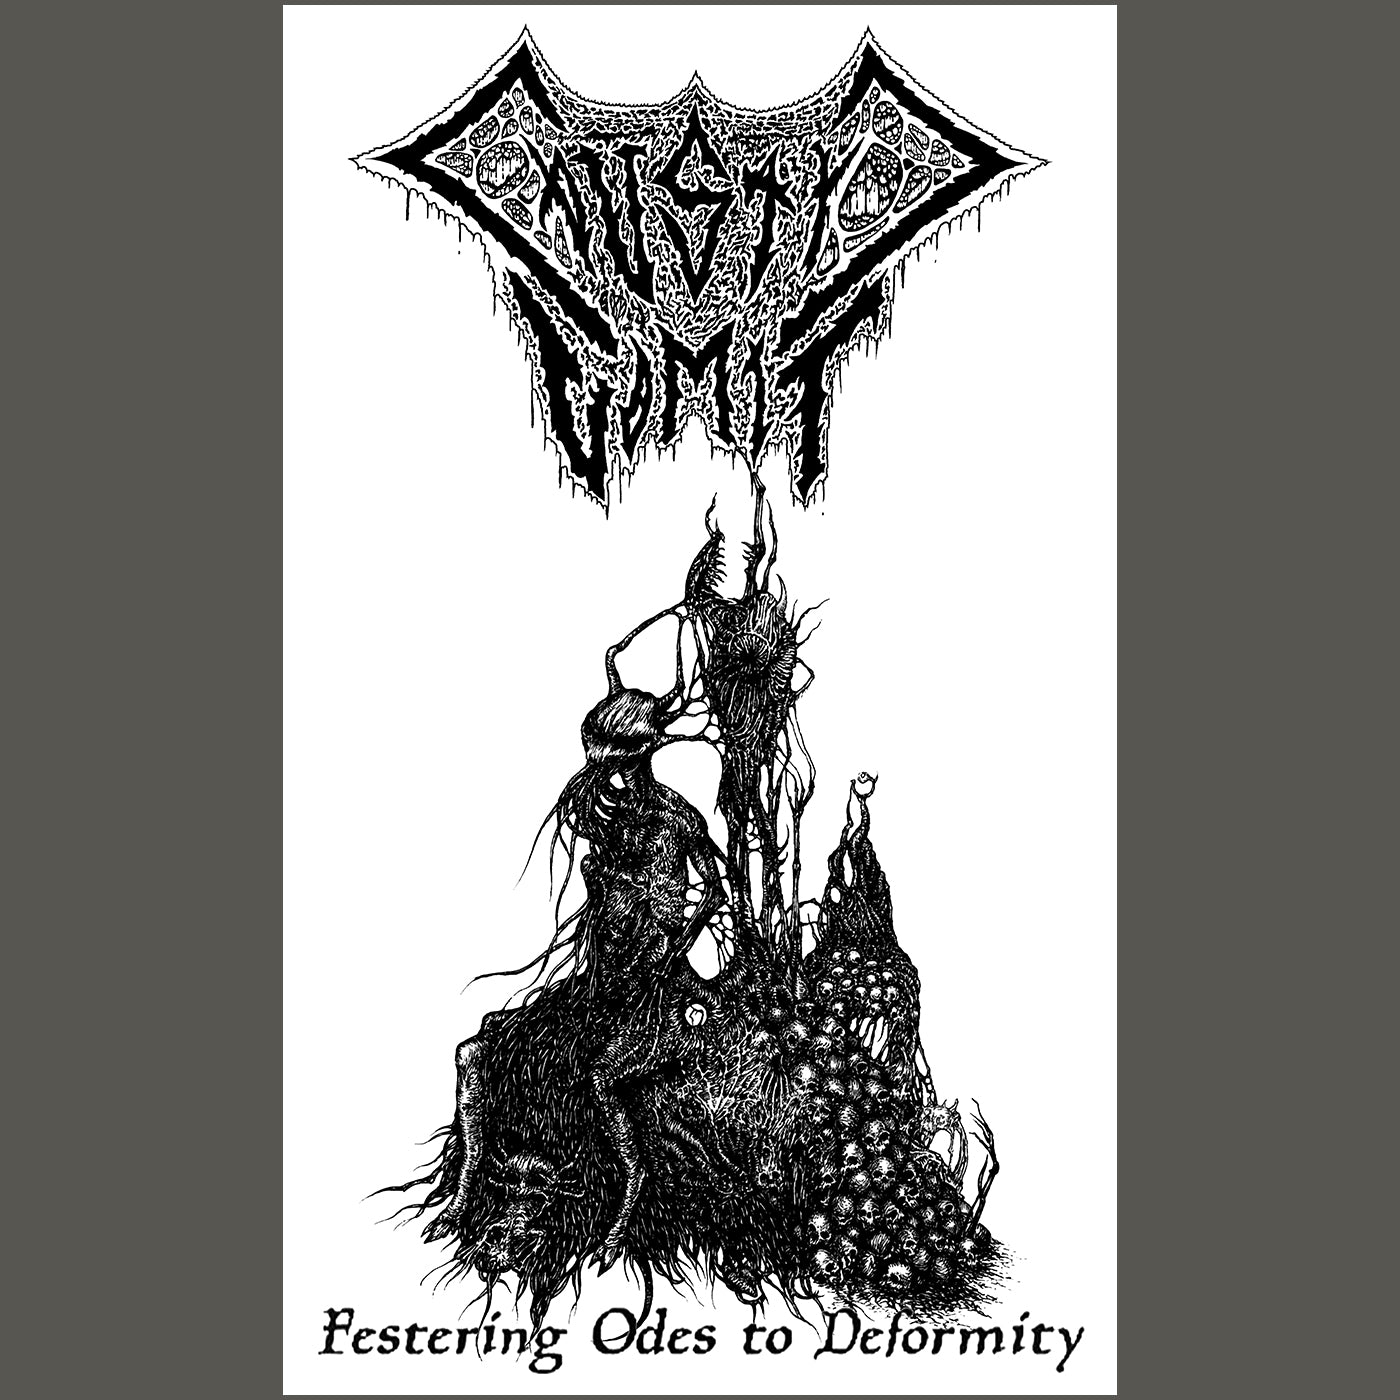 Caustic Vomit " Festering Odes To Deformity " Flag / Banner / Tapestry - White version